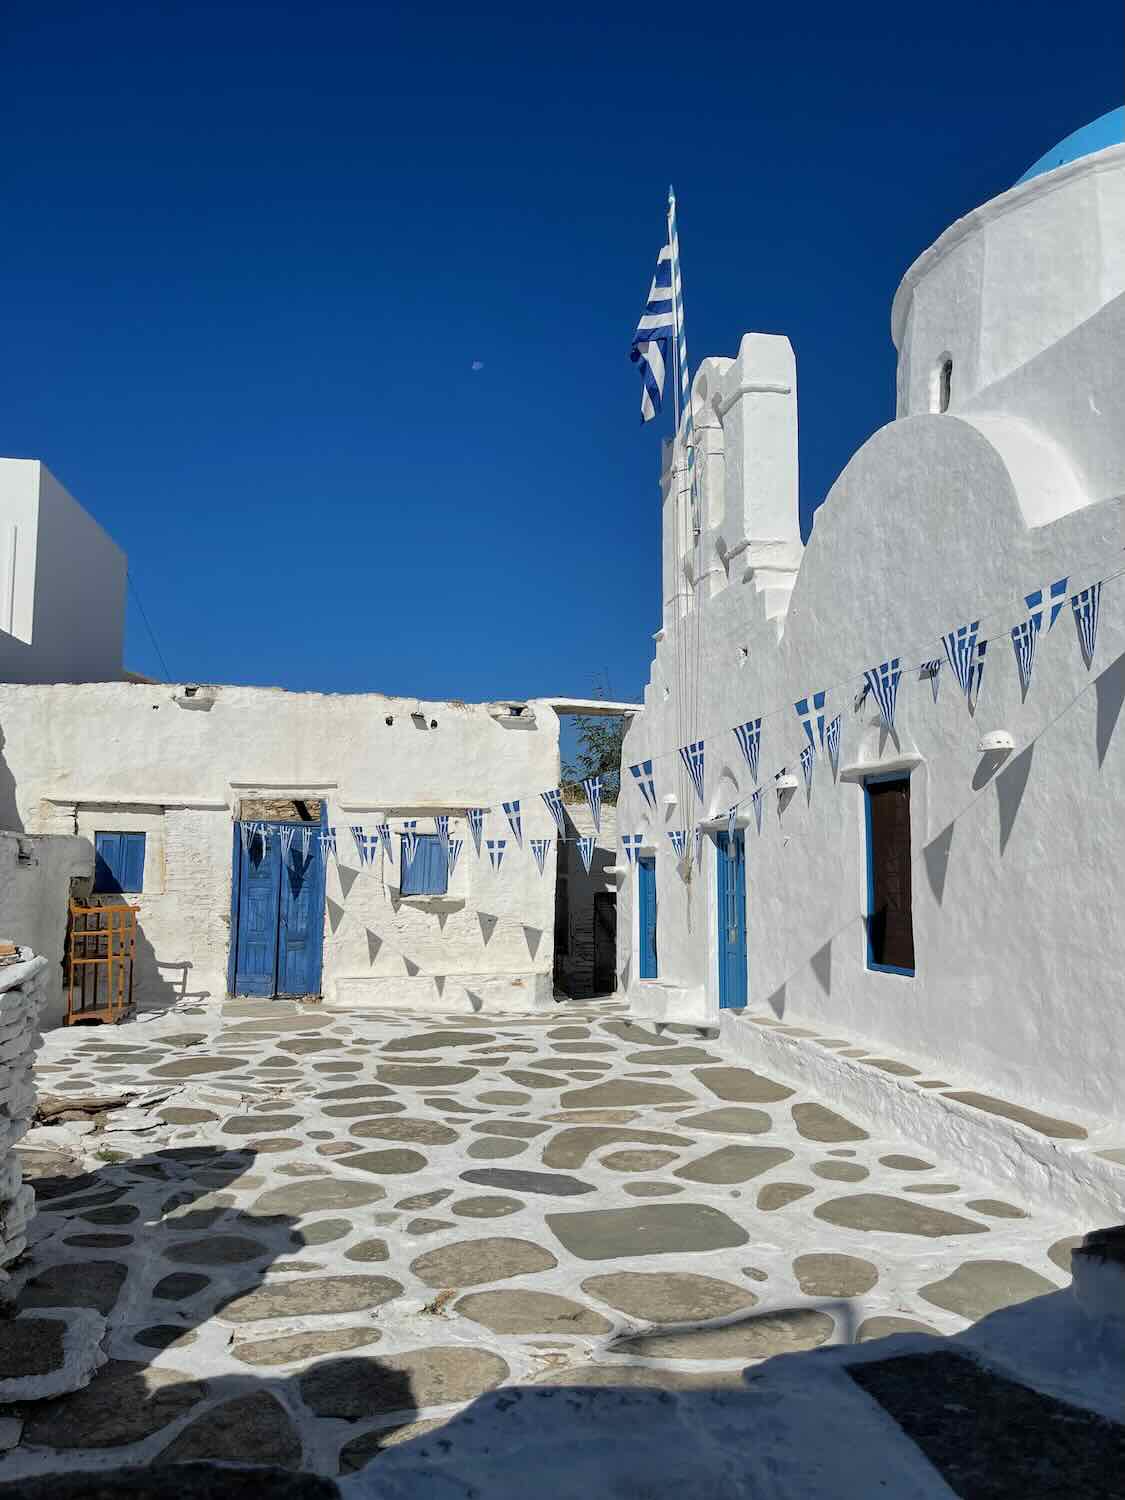 A stunning display of Sifnos’s traditional Cycladic architecture of the church.